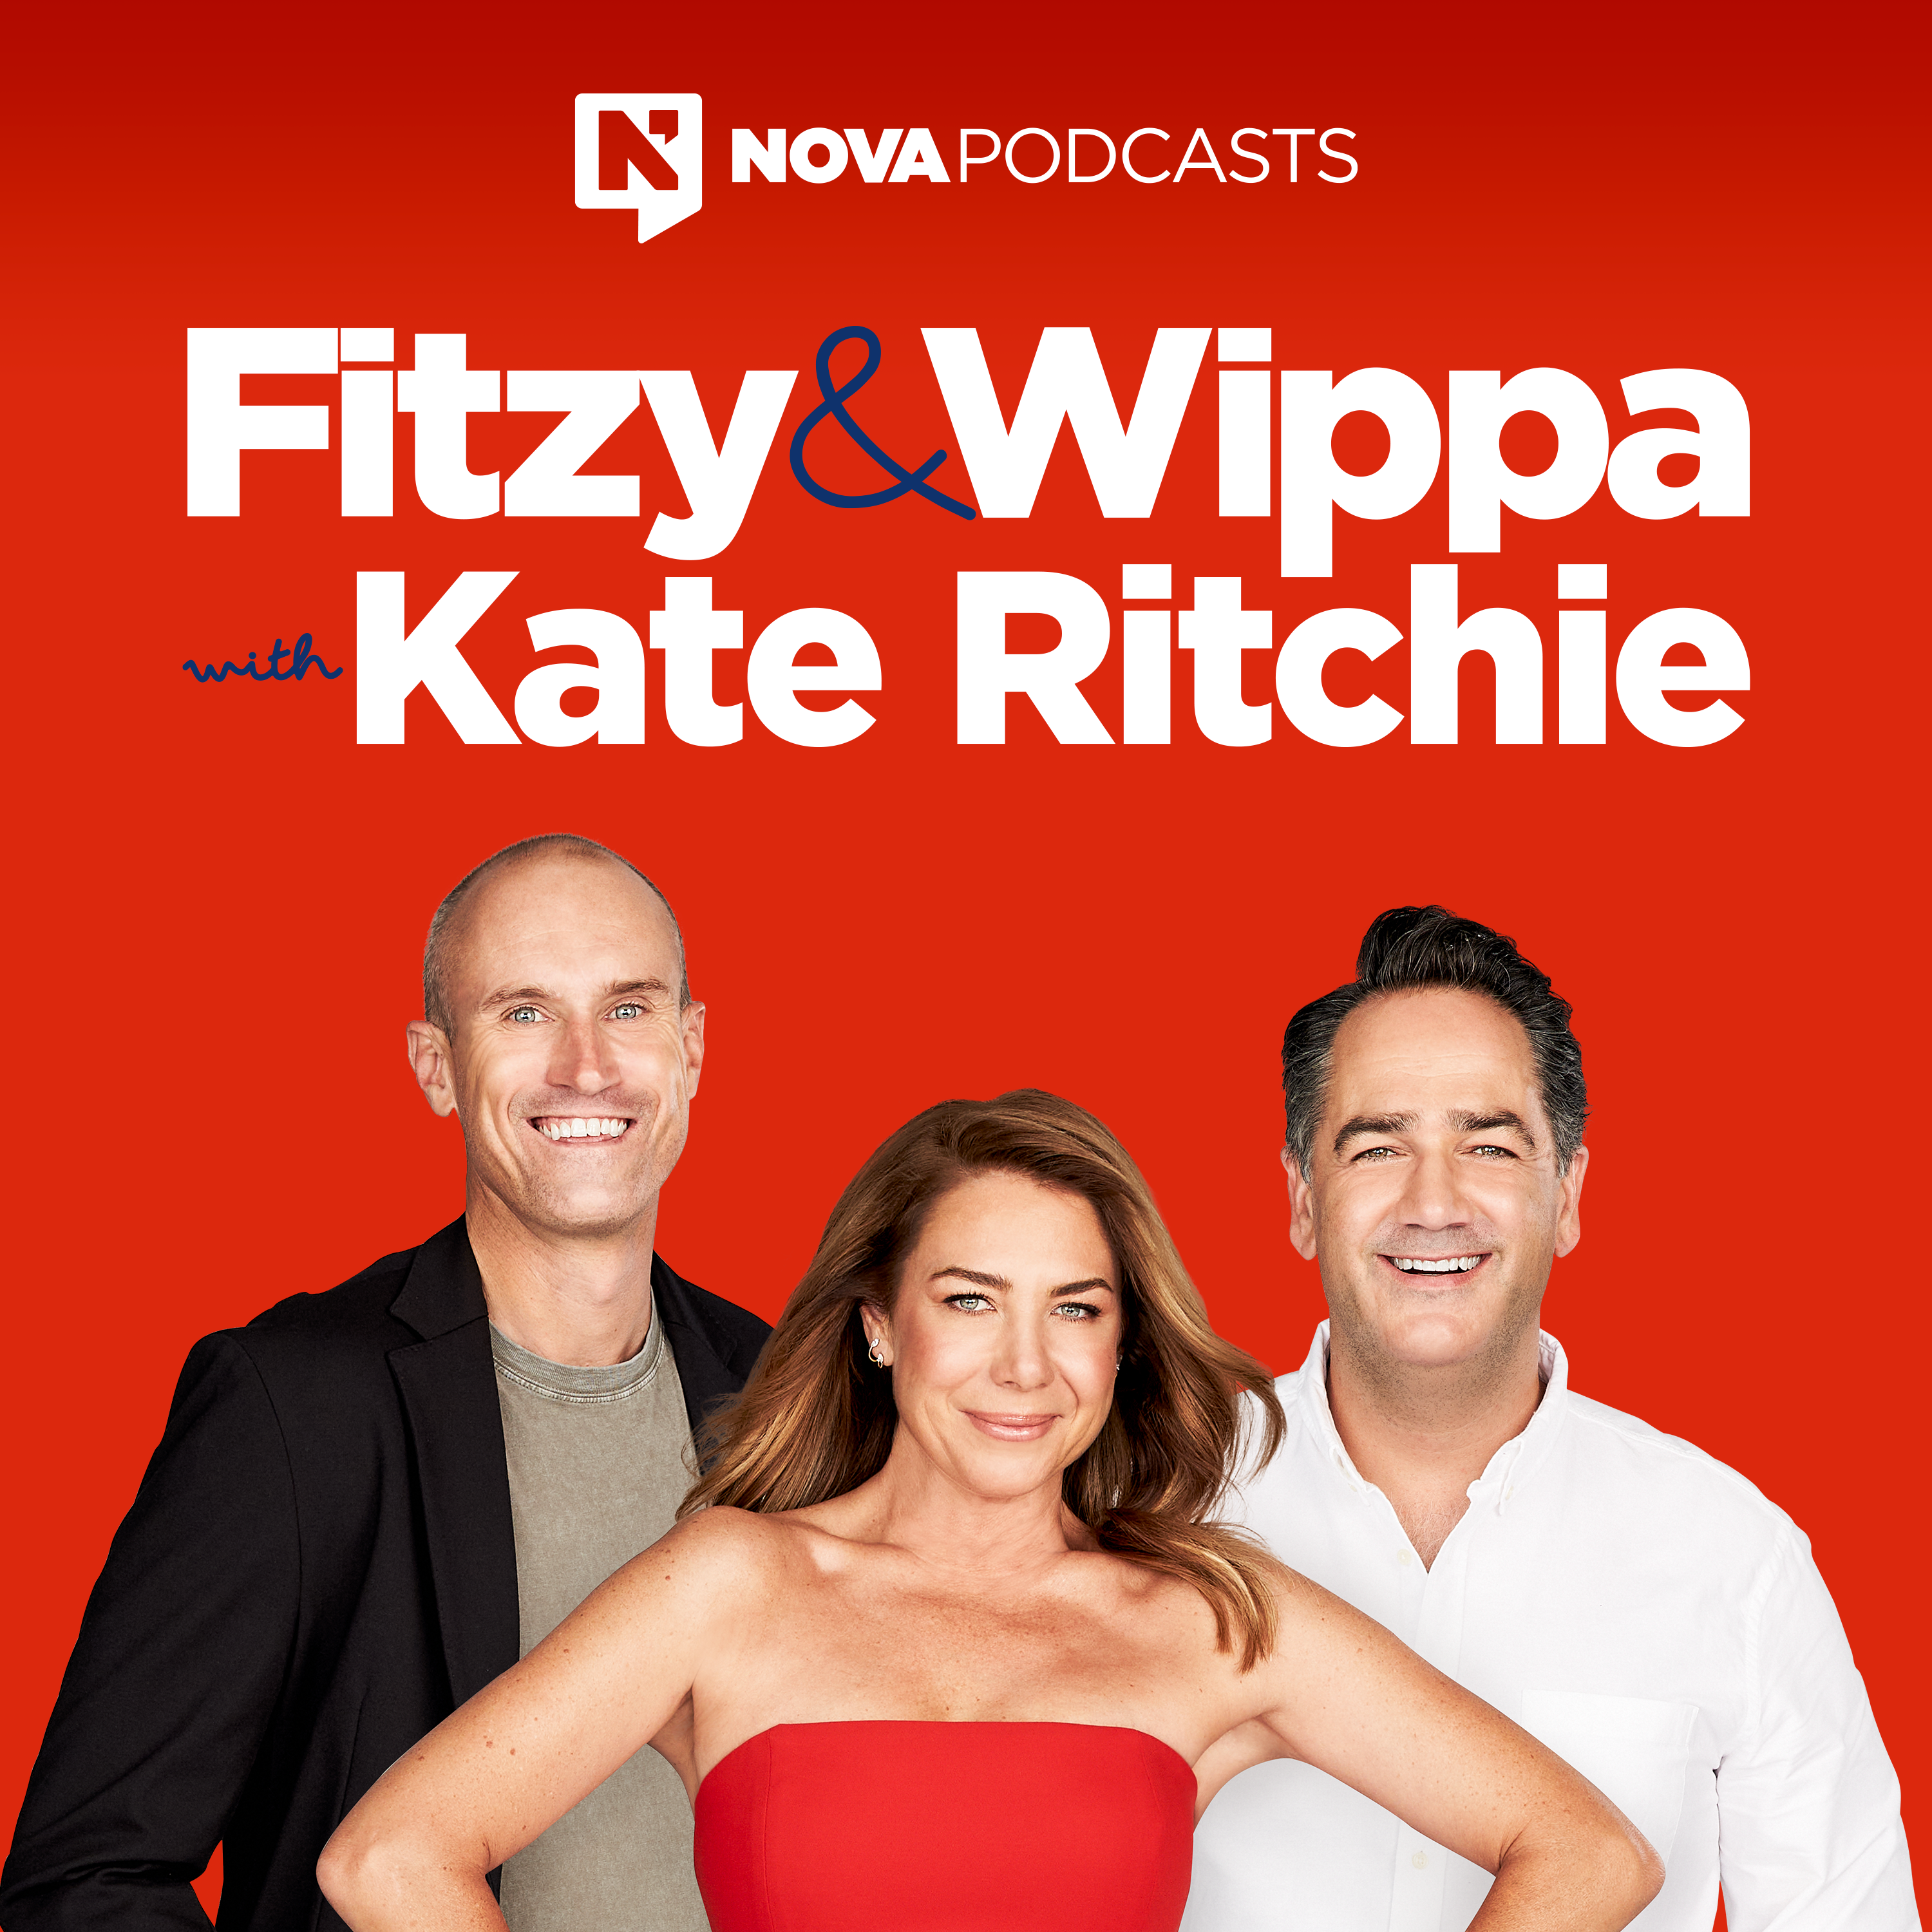 CATCH UP - Wippa shares some tips on how to get taller...